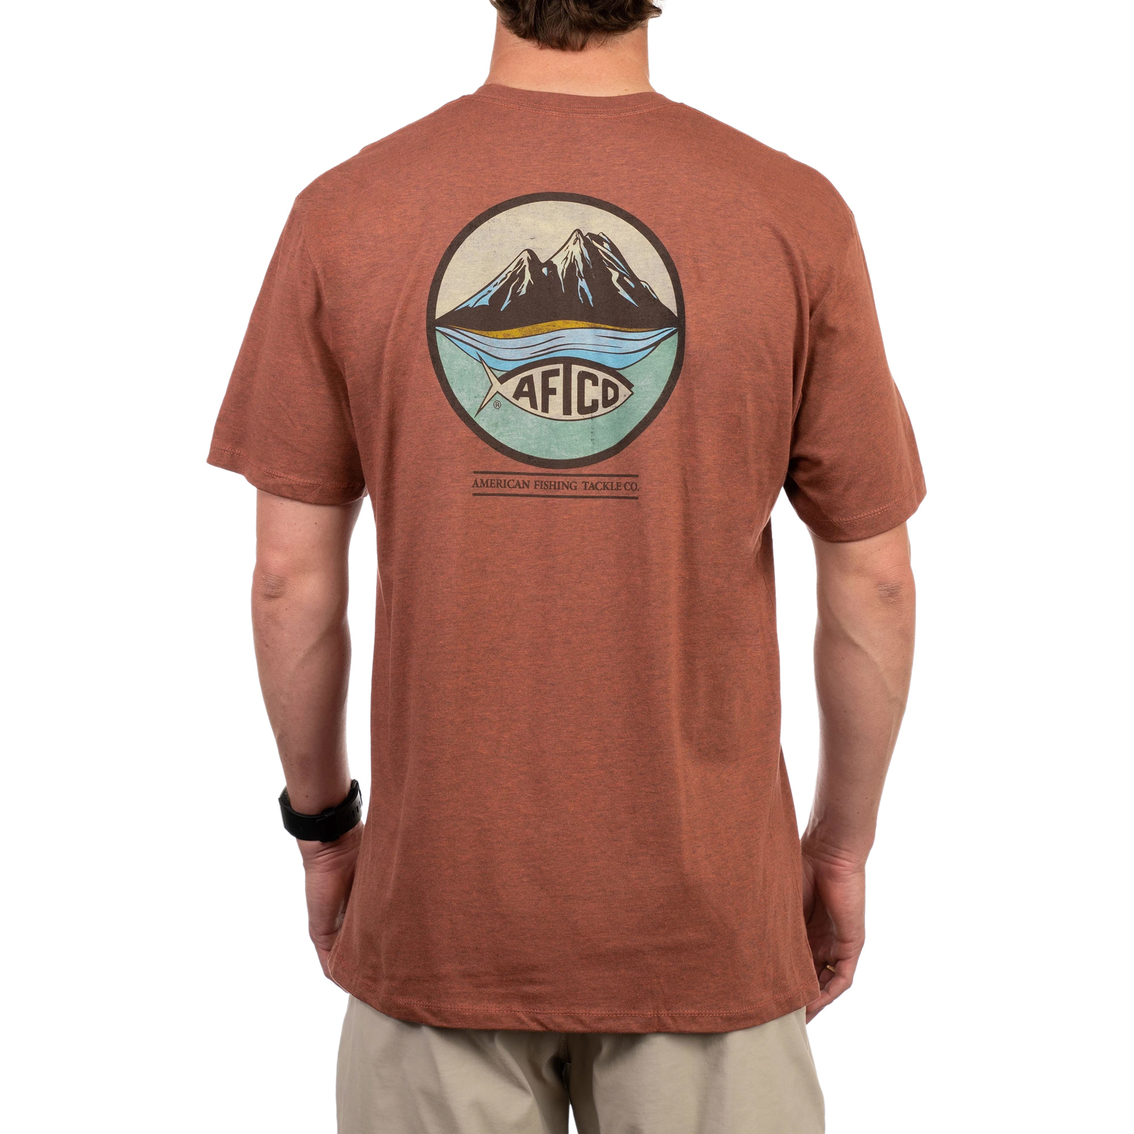 Aftco Denver Tee | Shirts | Clothing & Accessories | Shop The Exchange